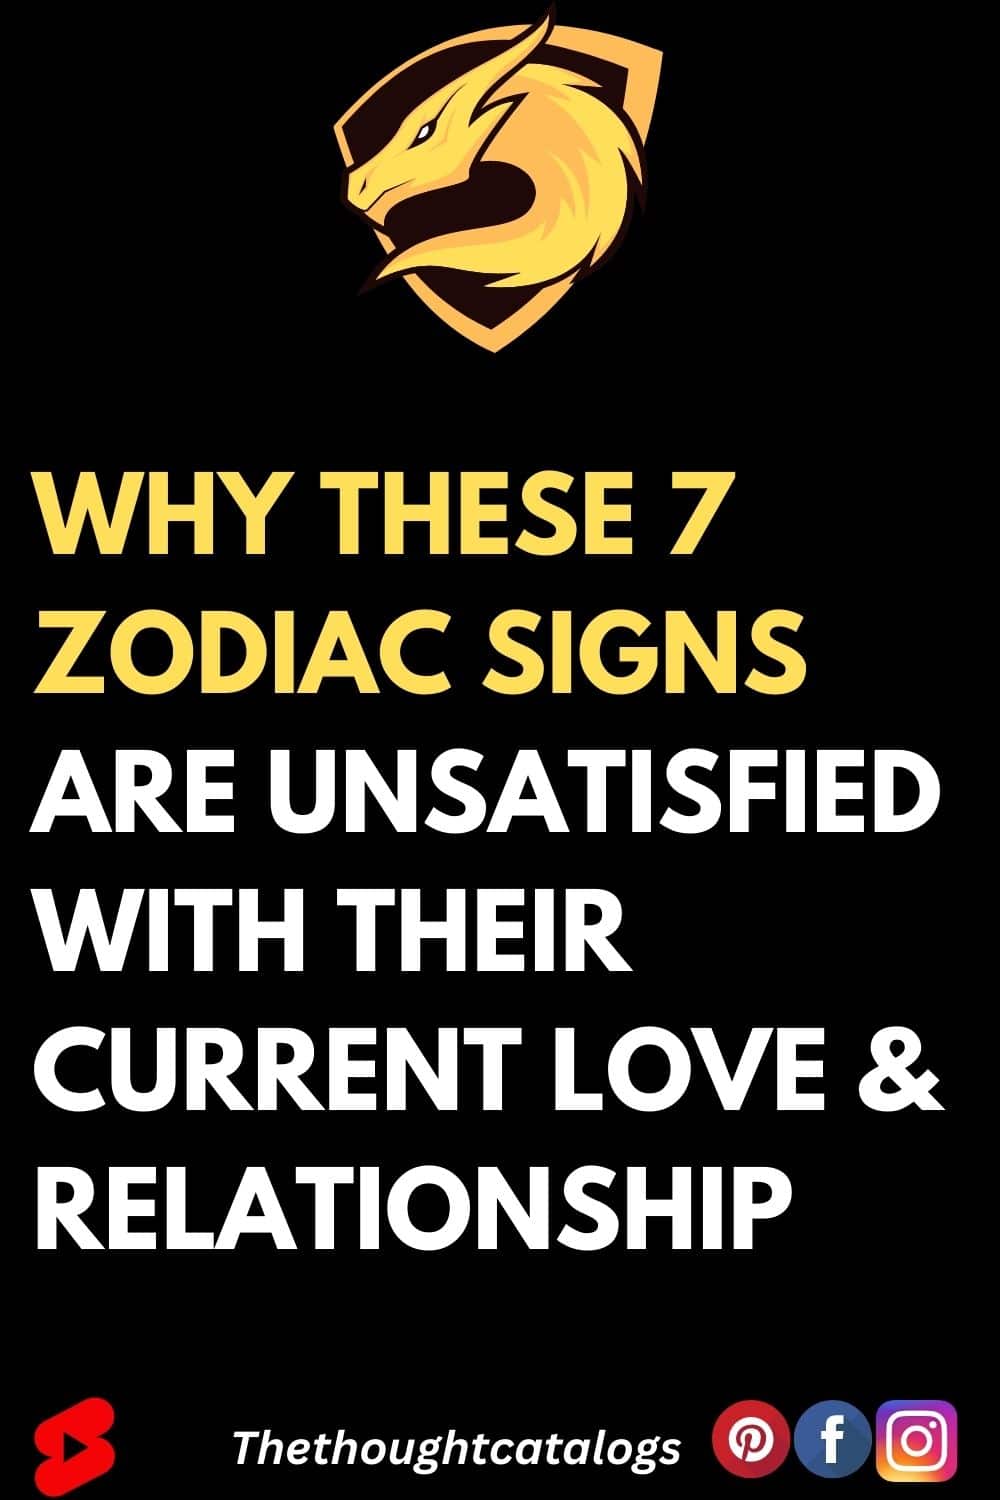 Why These 7 Zodiac Signs Are Unsatisfied With Their Current Love & Relationship